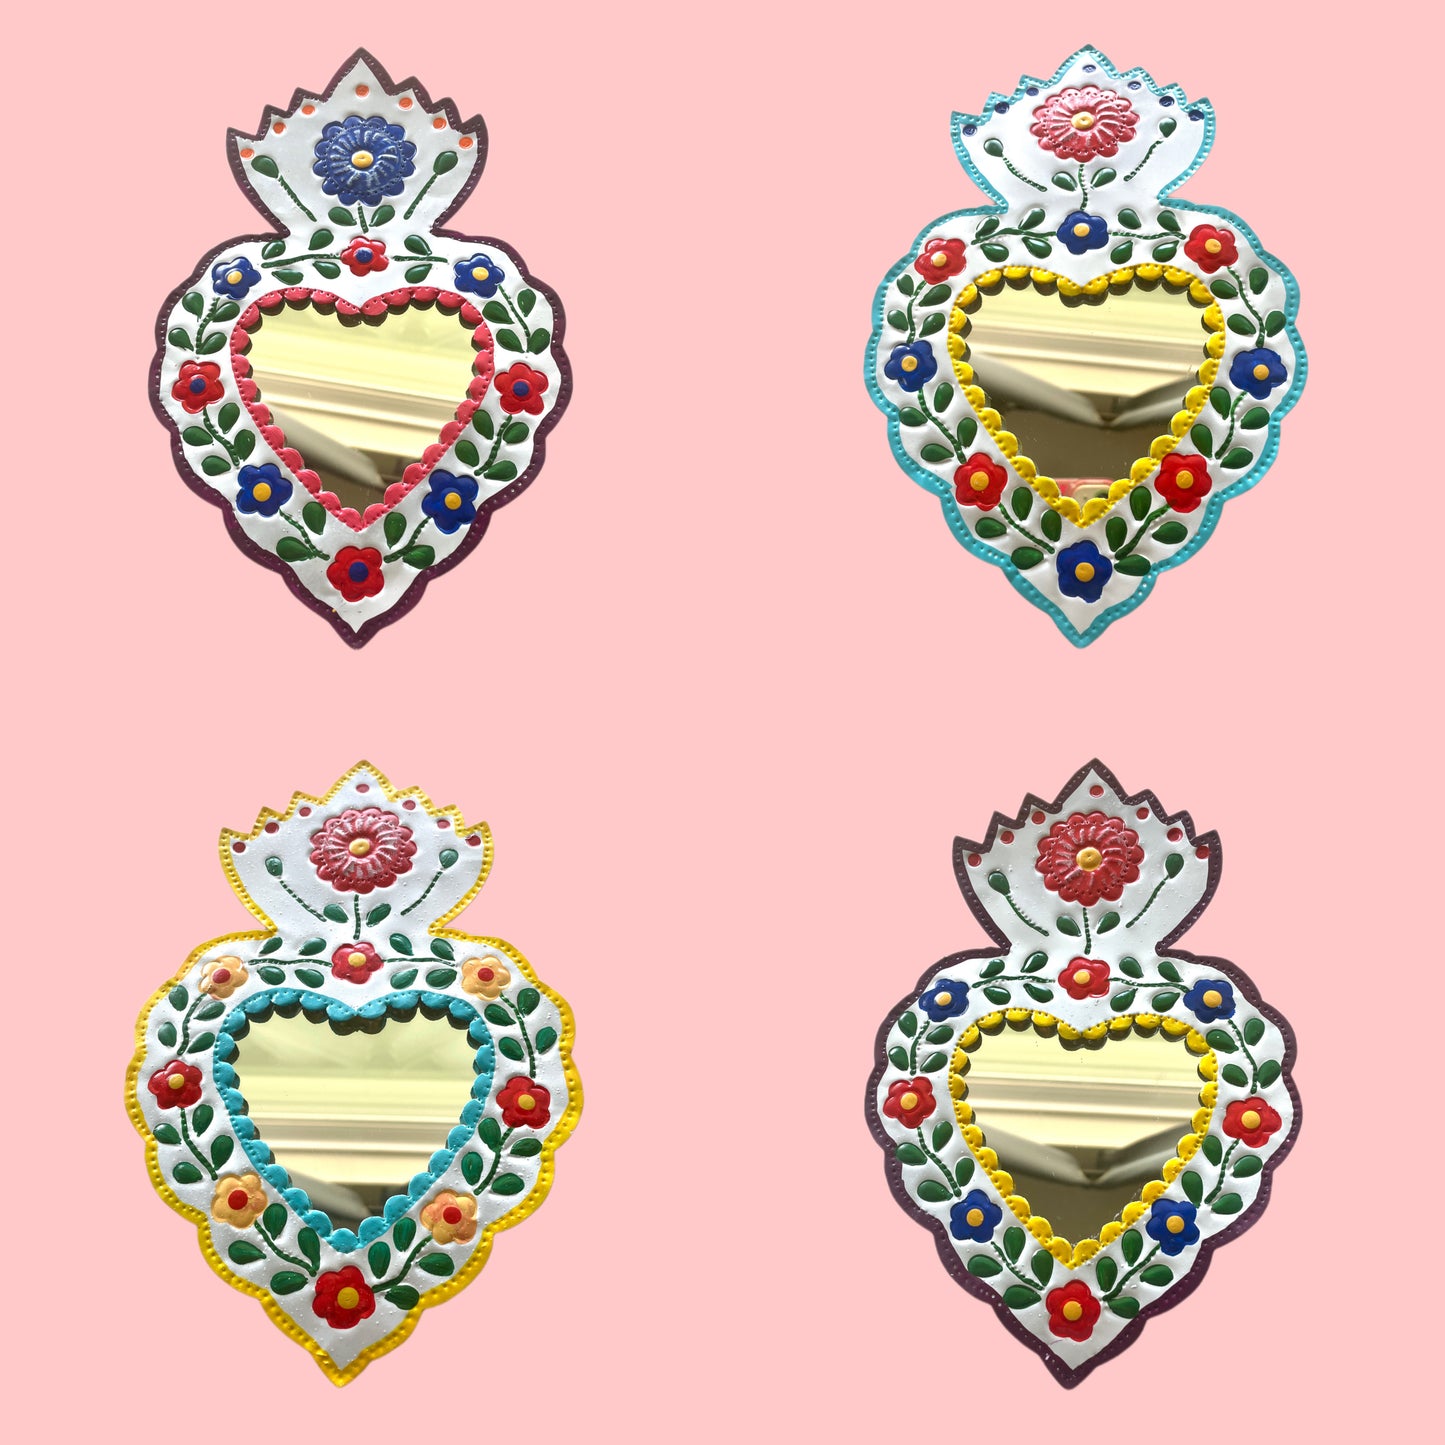 10" White Heart Tin Mirror (Multiple Colors Available!)